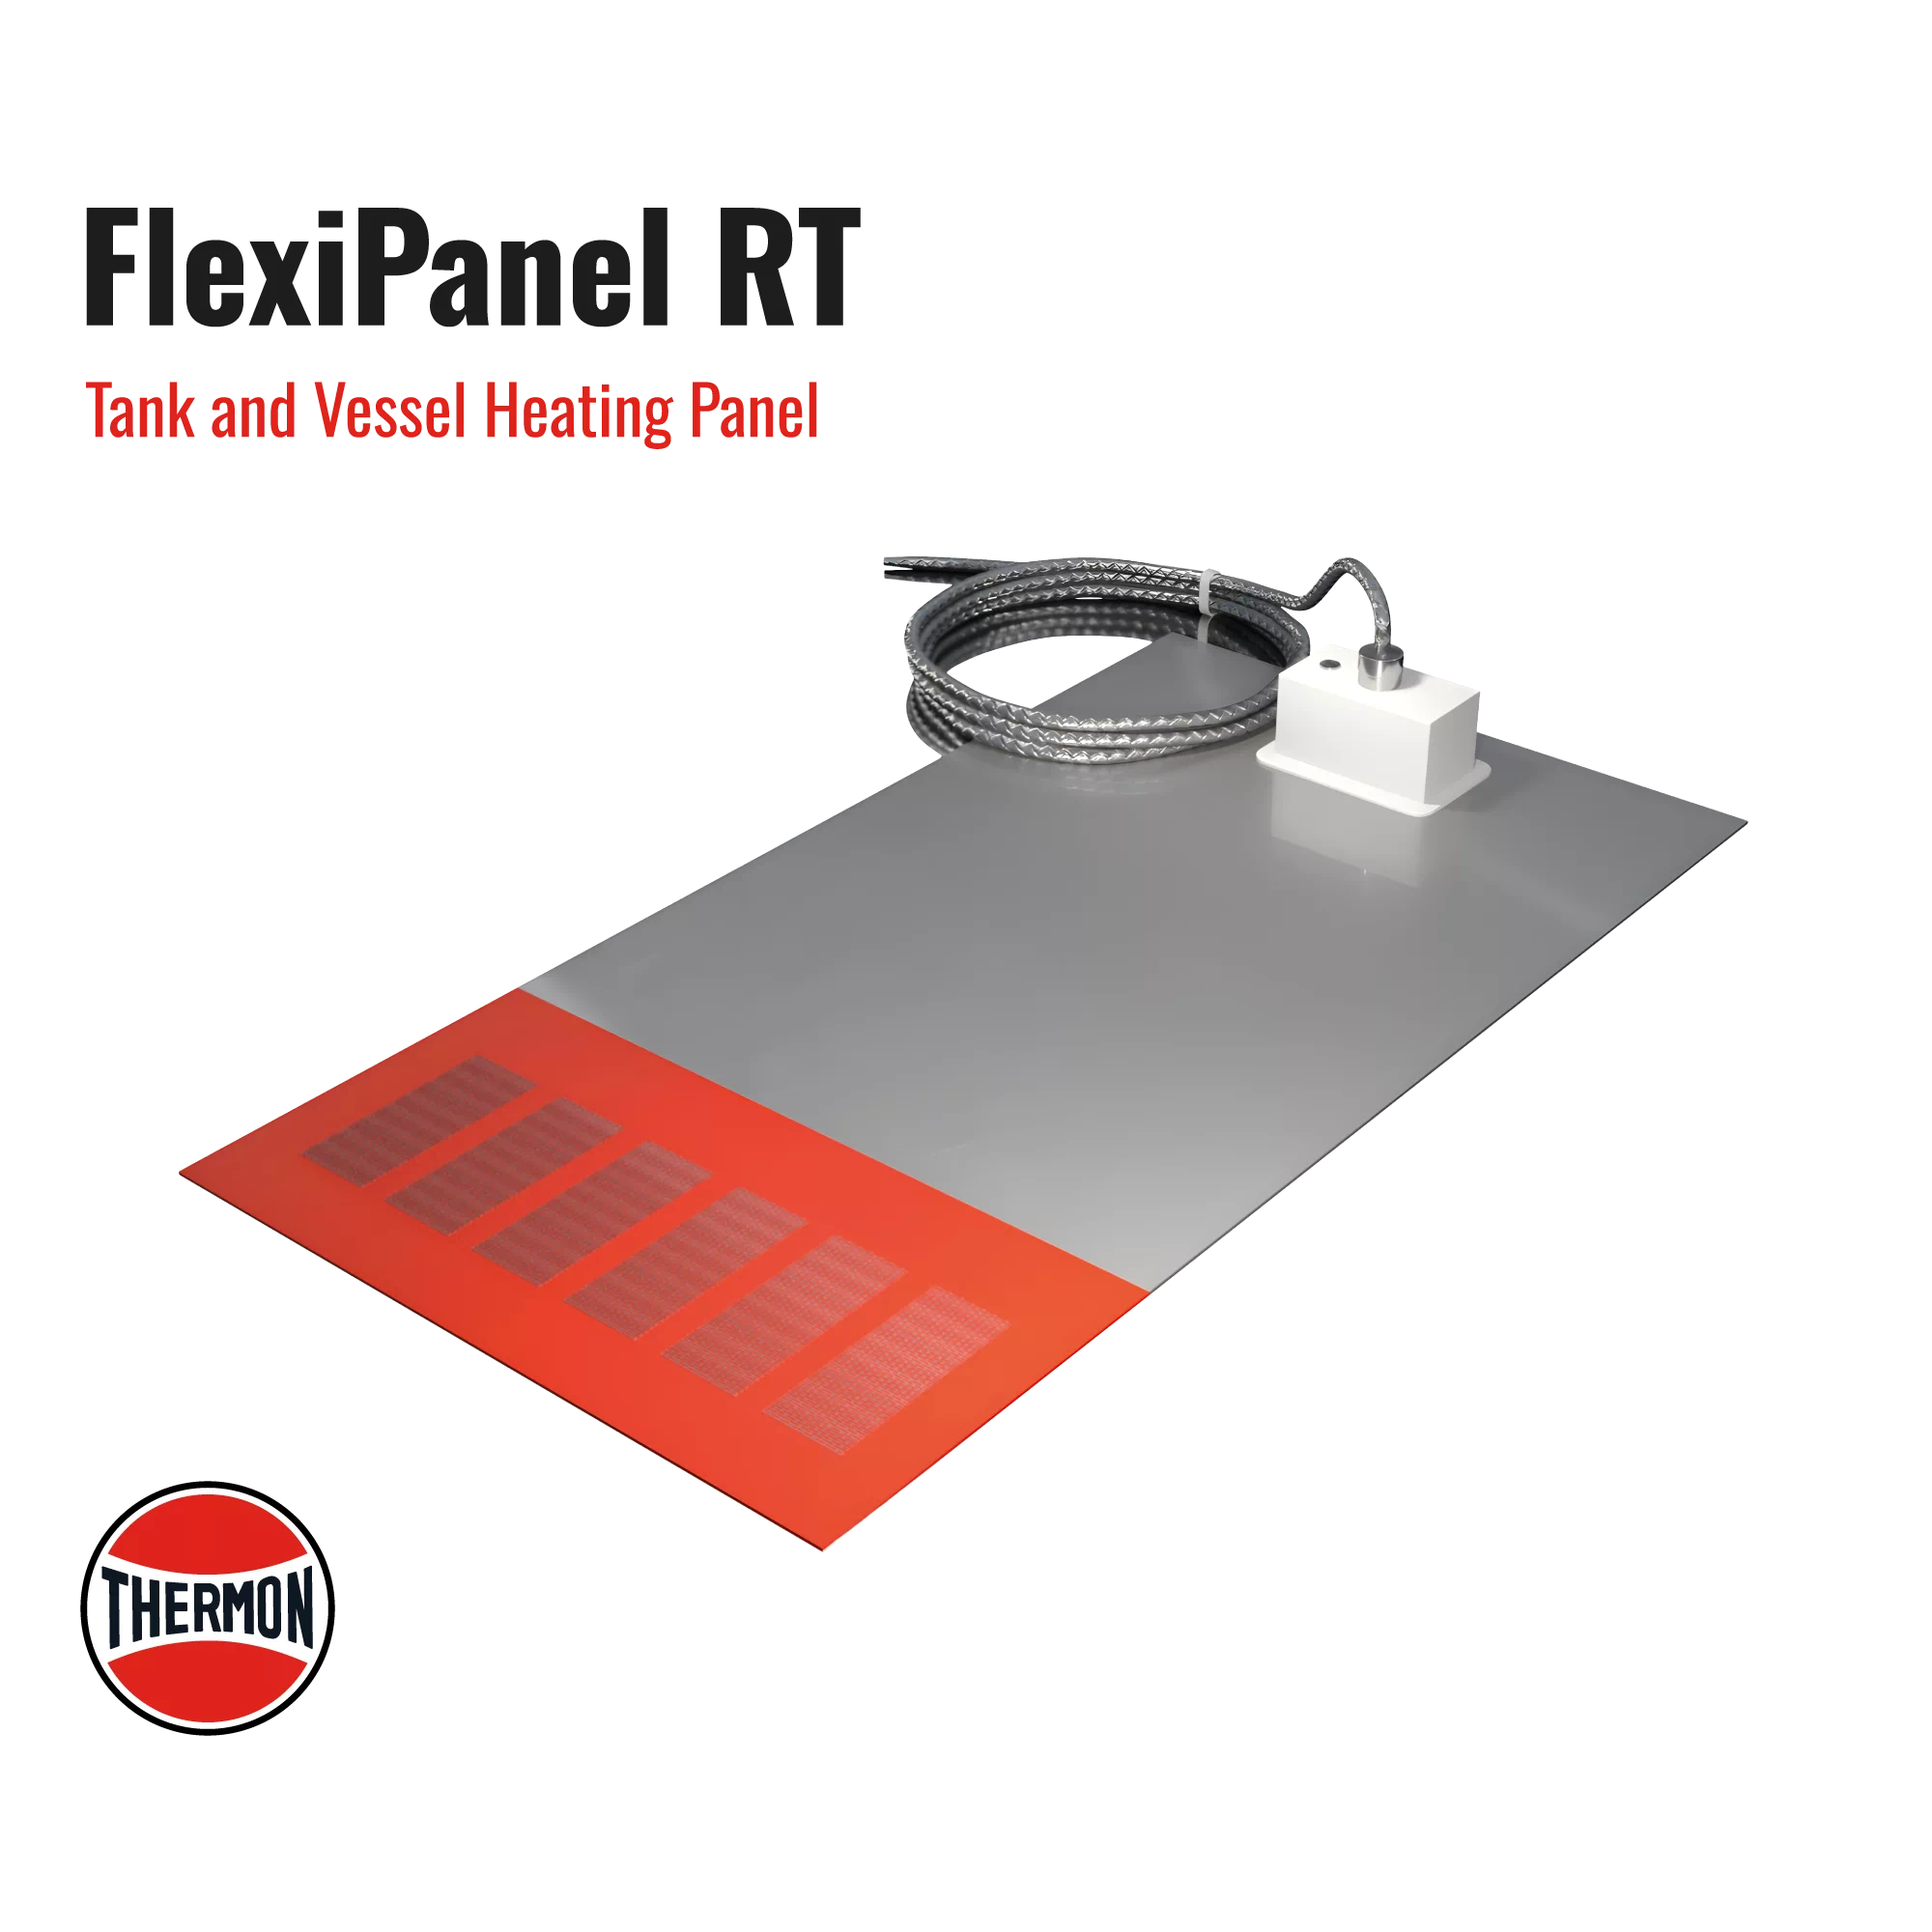 Thermon-RT-FlexiPanel-Industrial-Heating-Heat-Tracing-Systems